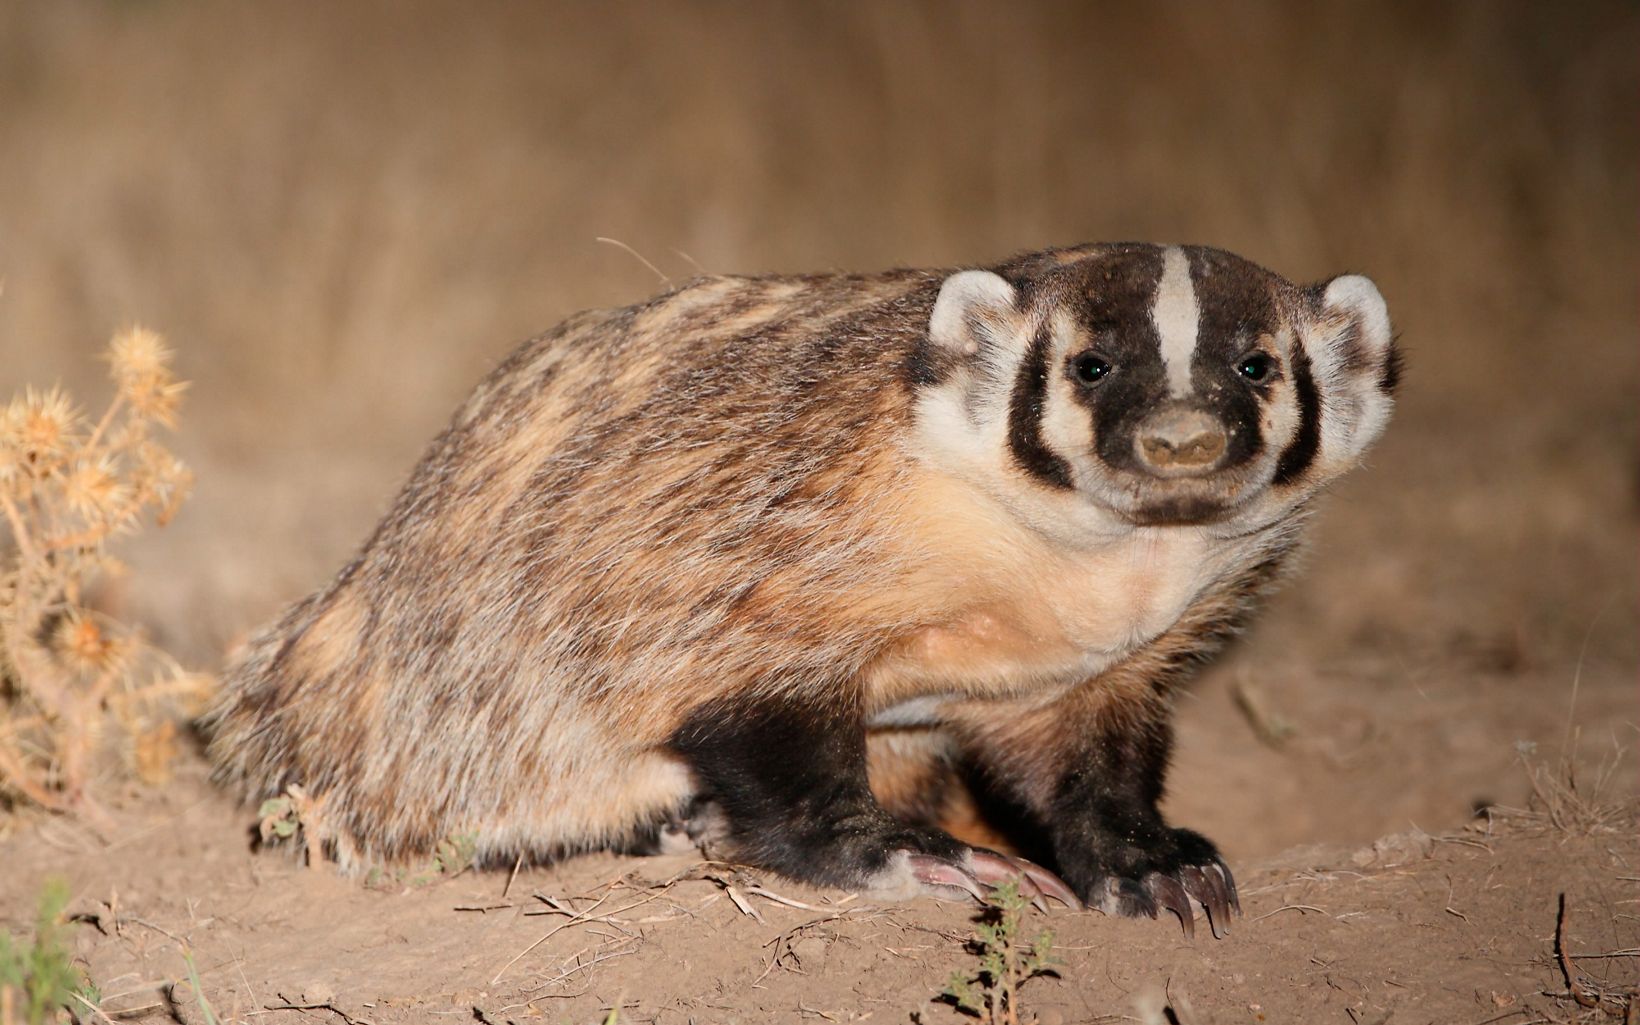 Badger Badgers are powerful digging machines with strong shoulders and forelimbs. They mostly eat other burrowing animals like gophers or prairie dogs and smaller mammals like mice. © Bob Gress